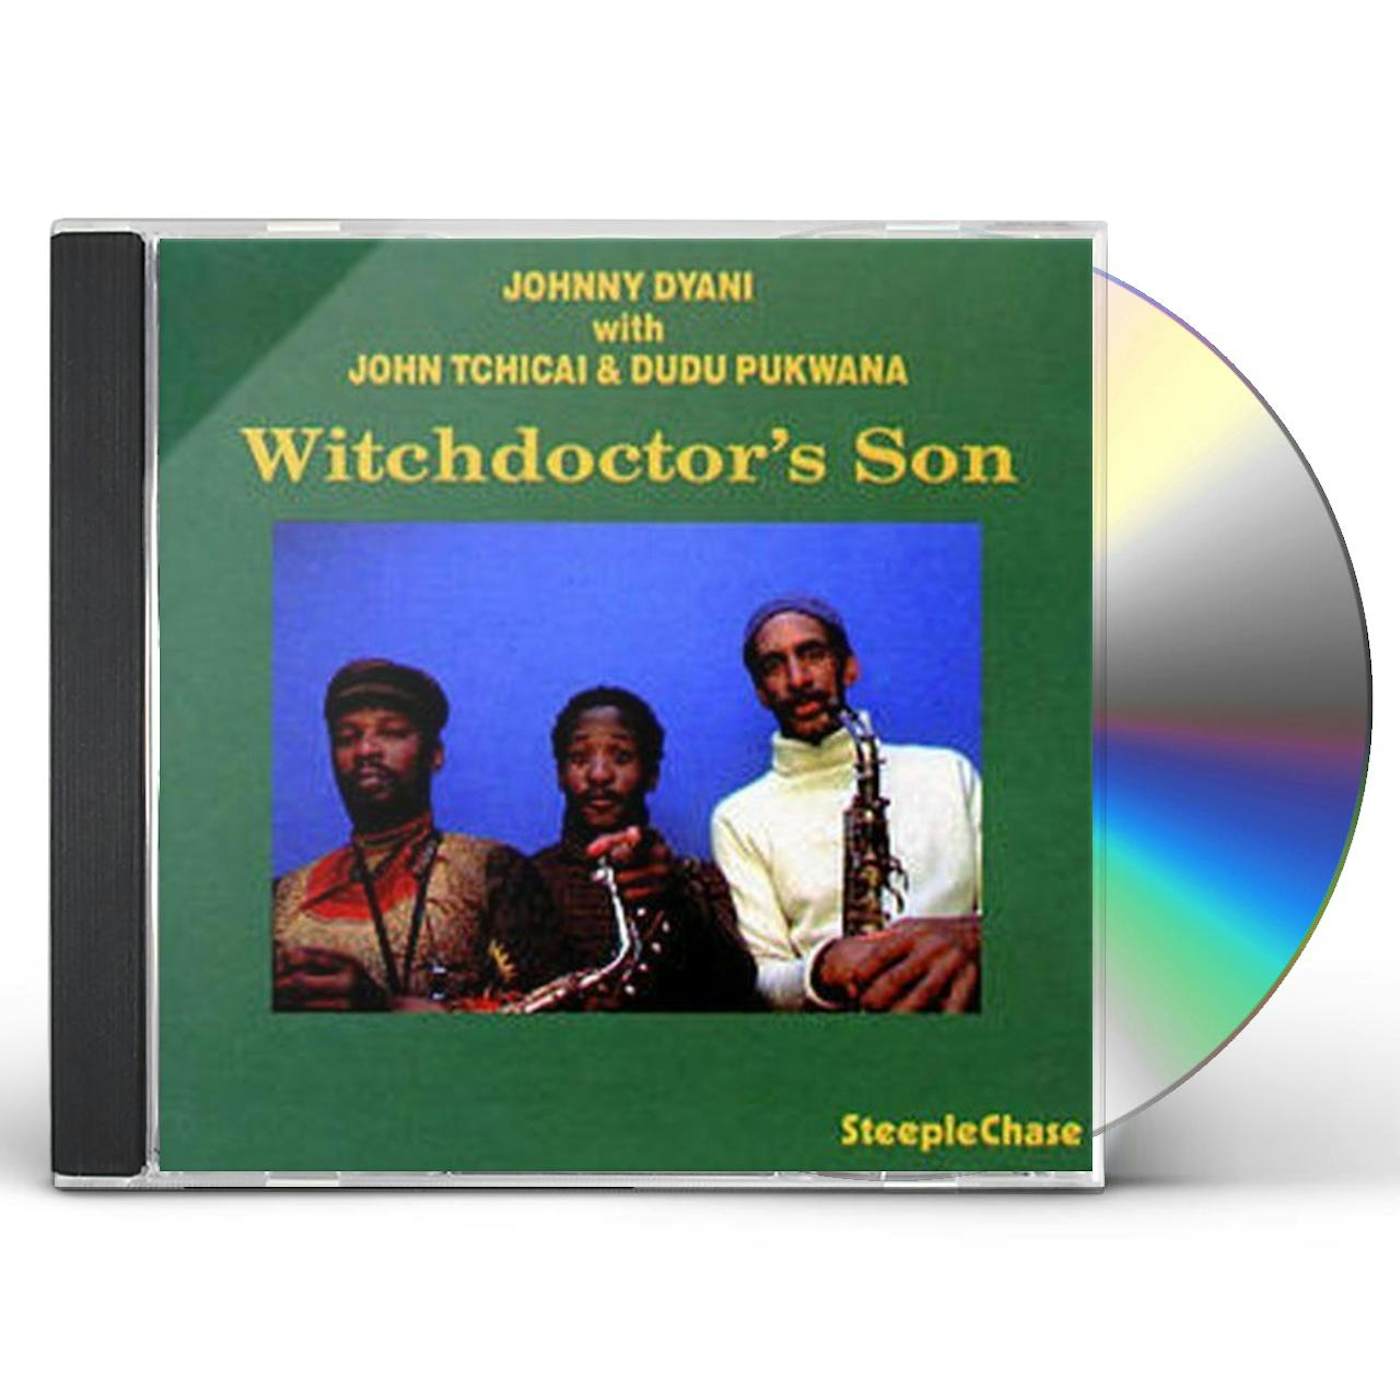 Johnny Dyani WITCHDOCTOR'S SON CD